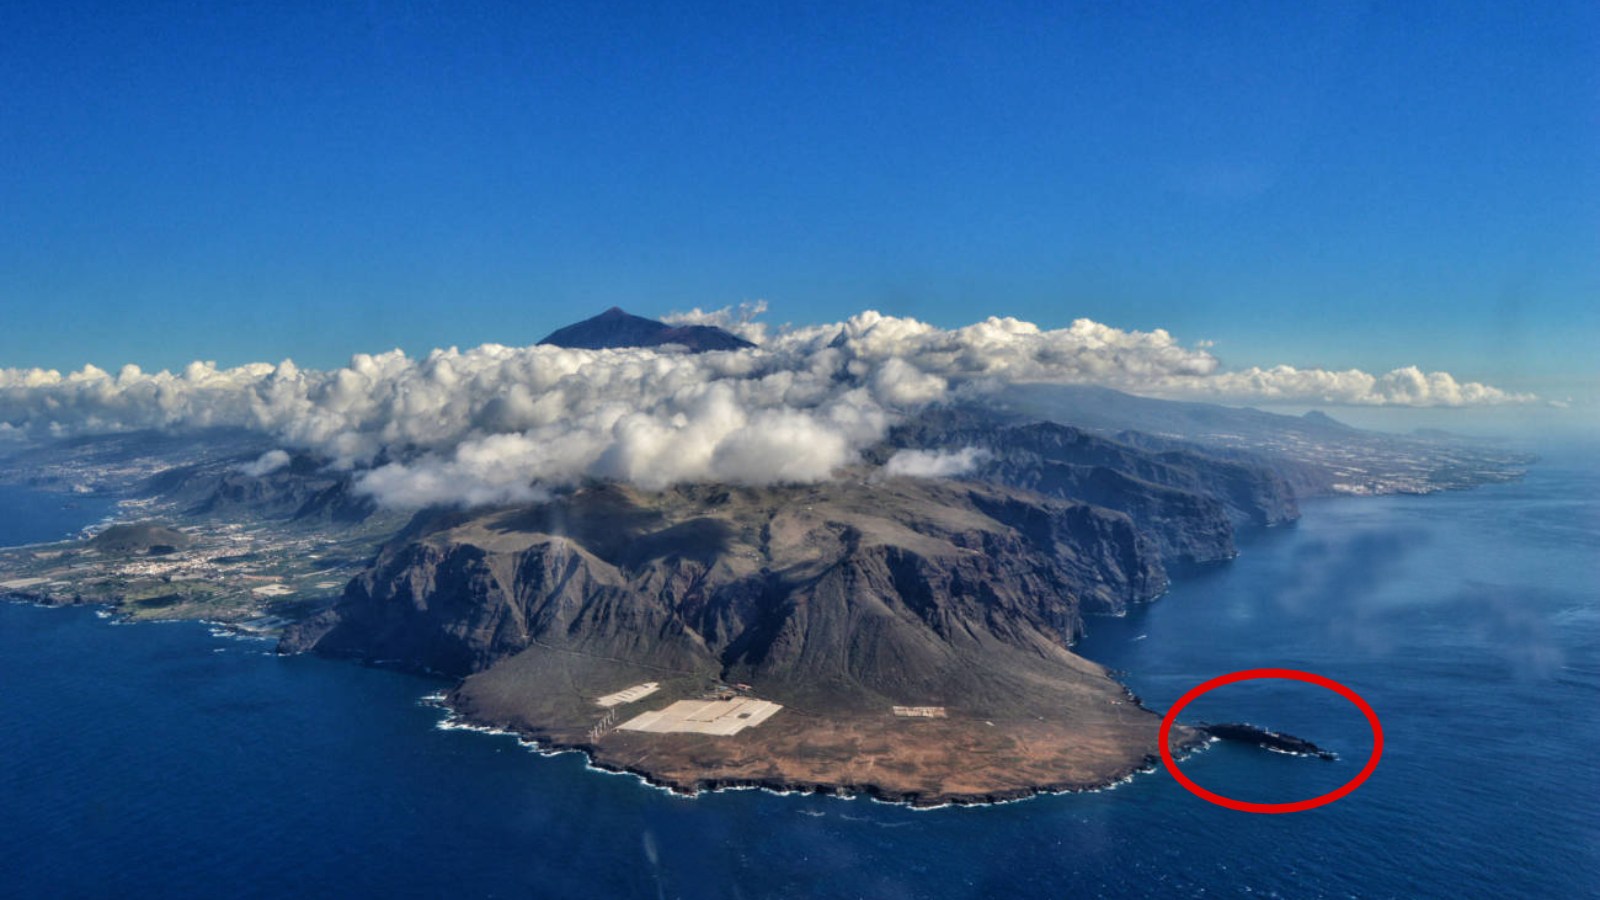 Bird's eye view of Teno Nature Park, with Punta de Teno Tenerife on the right and Teide in the background